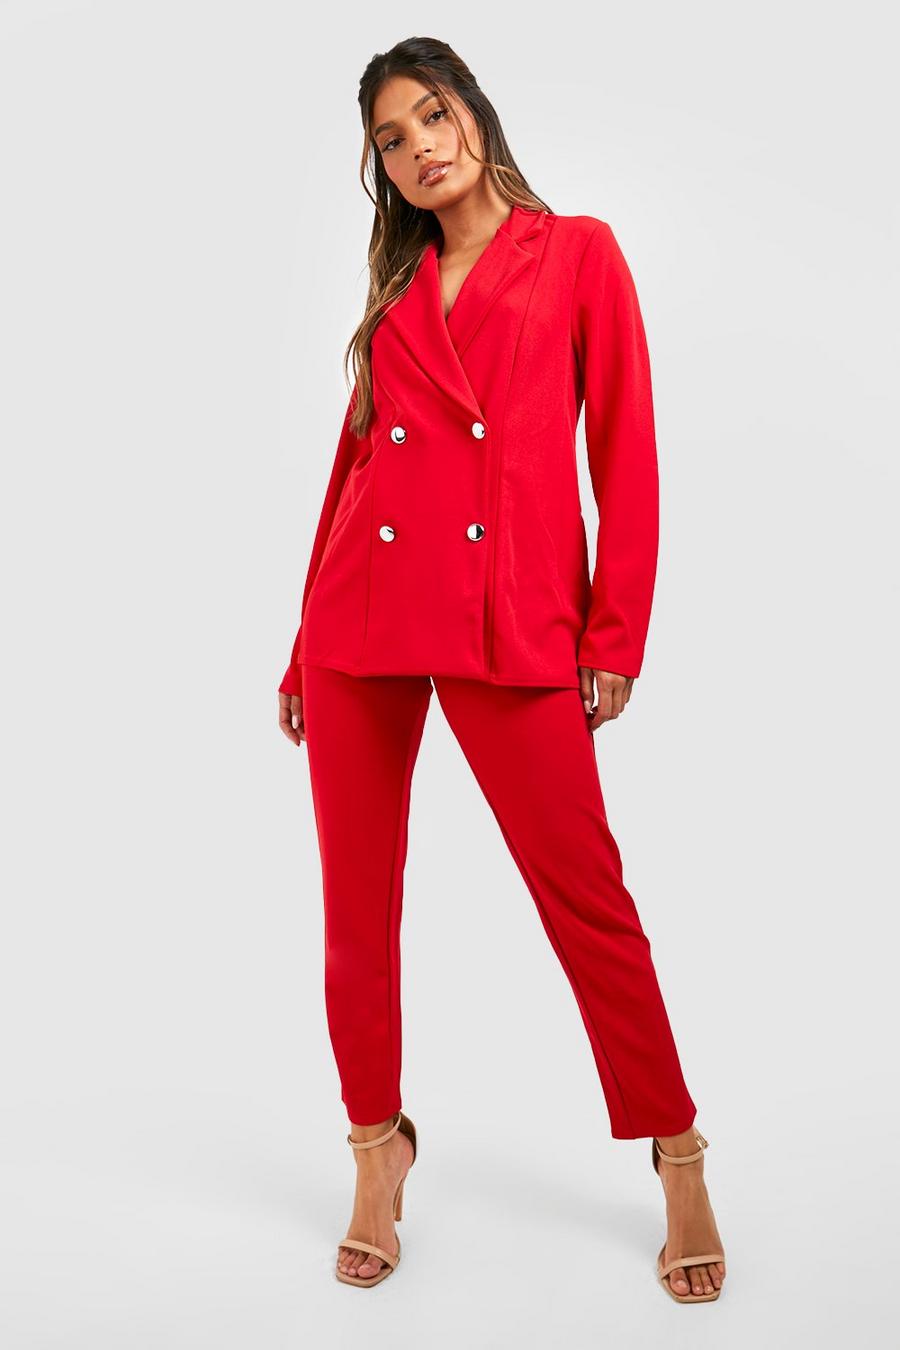 Red Jersey Double Breasted Blazer And Pants Suit Set